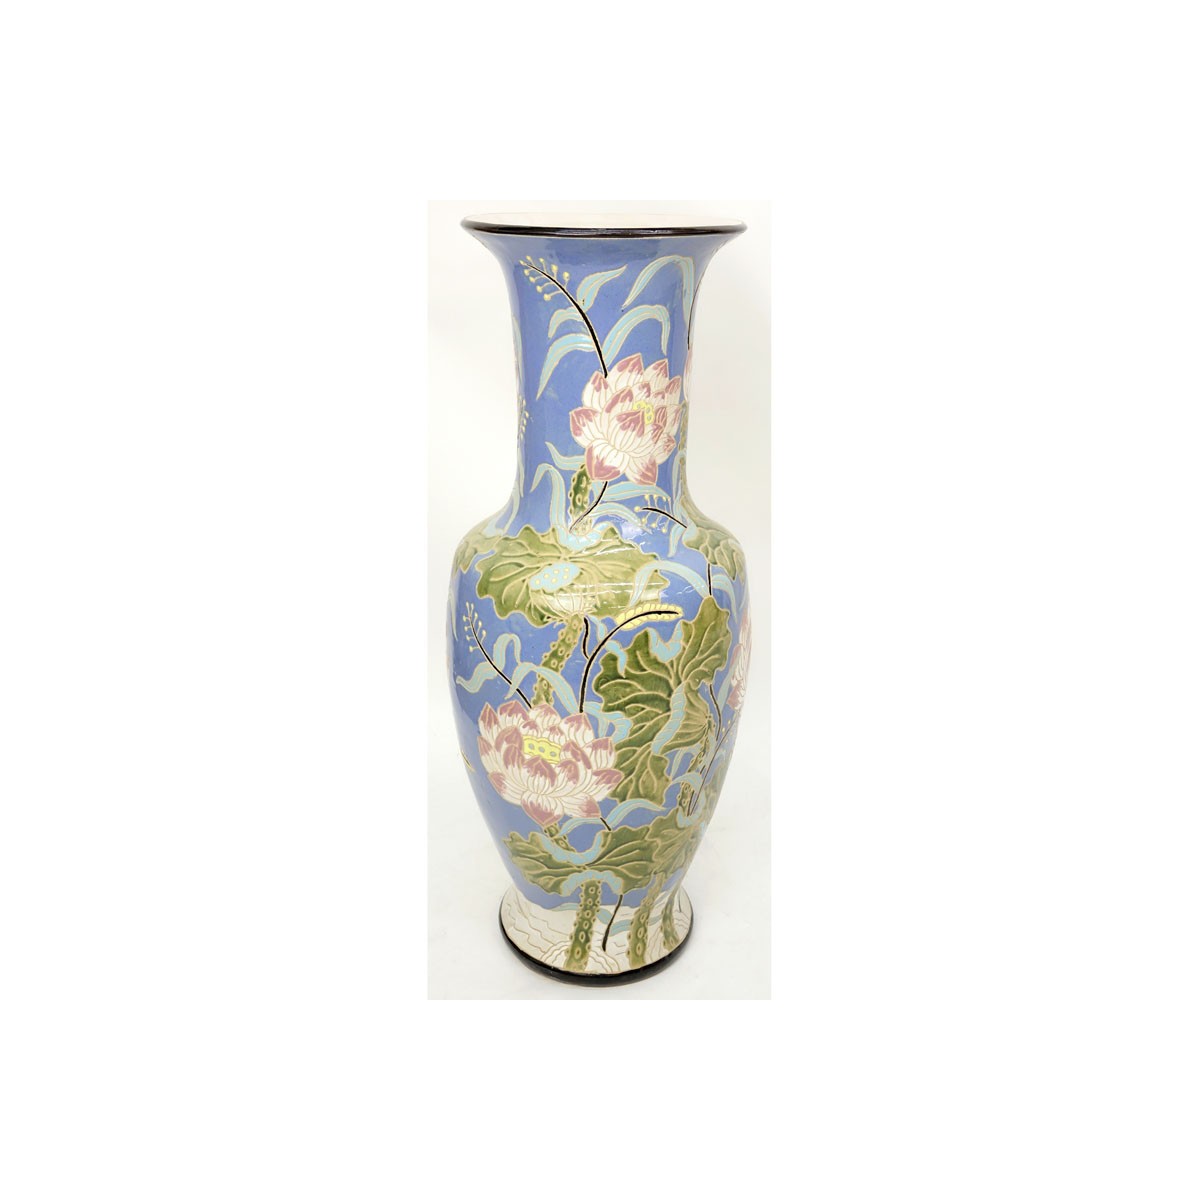 Monumental Majolica Pottery Vase. Features Asian i - Image 5 of 7